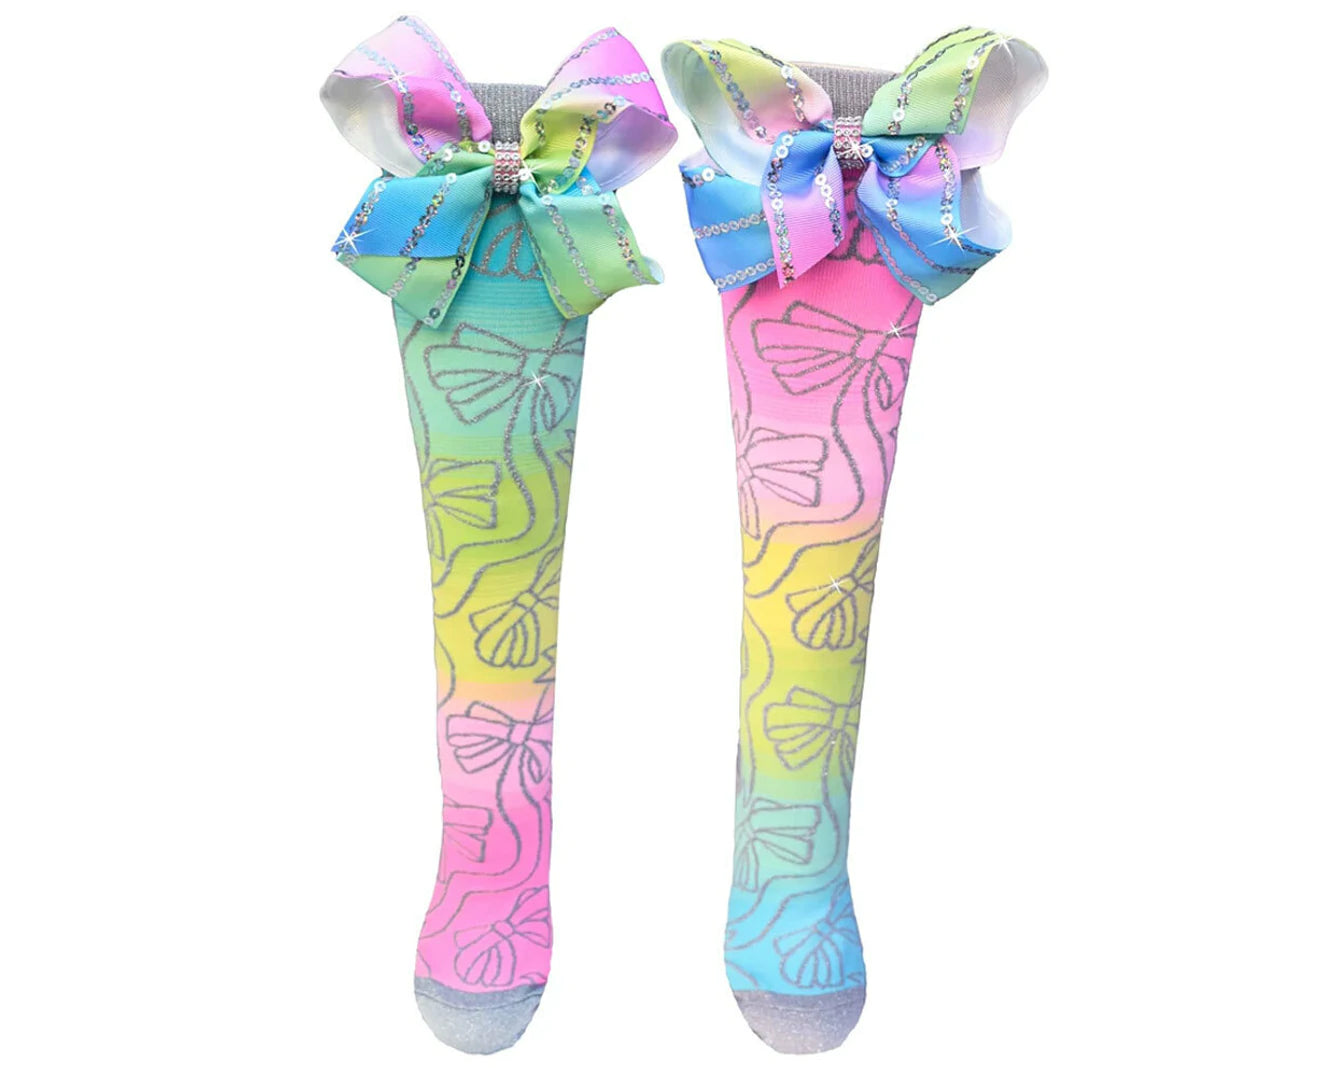 Sparkly Bowsties Long Knee High Socks Pair Unisex - Sparkly Bows